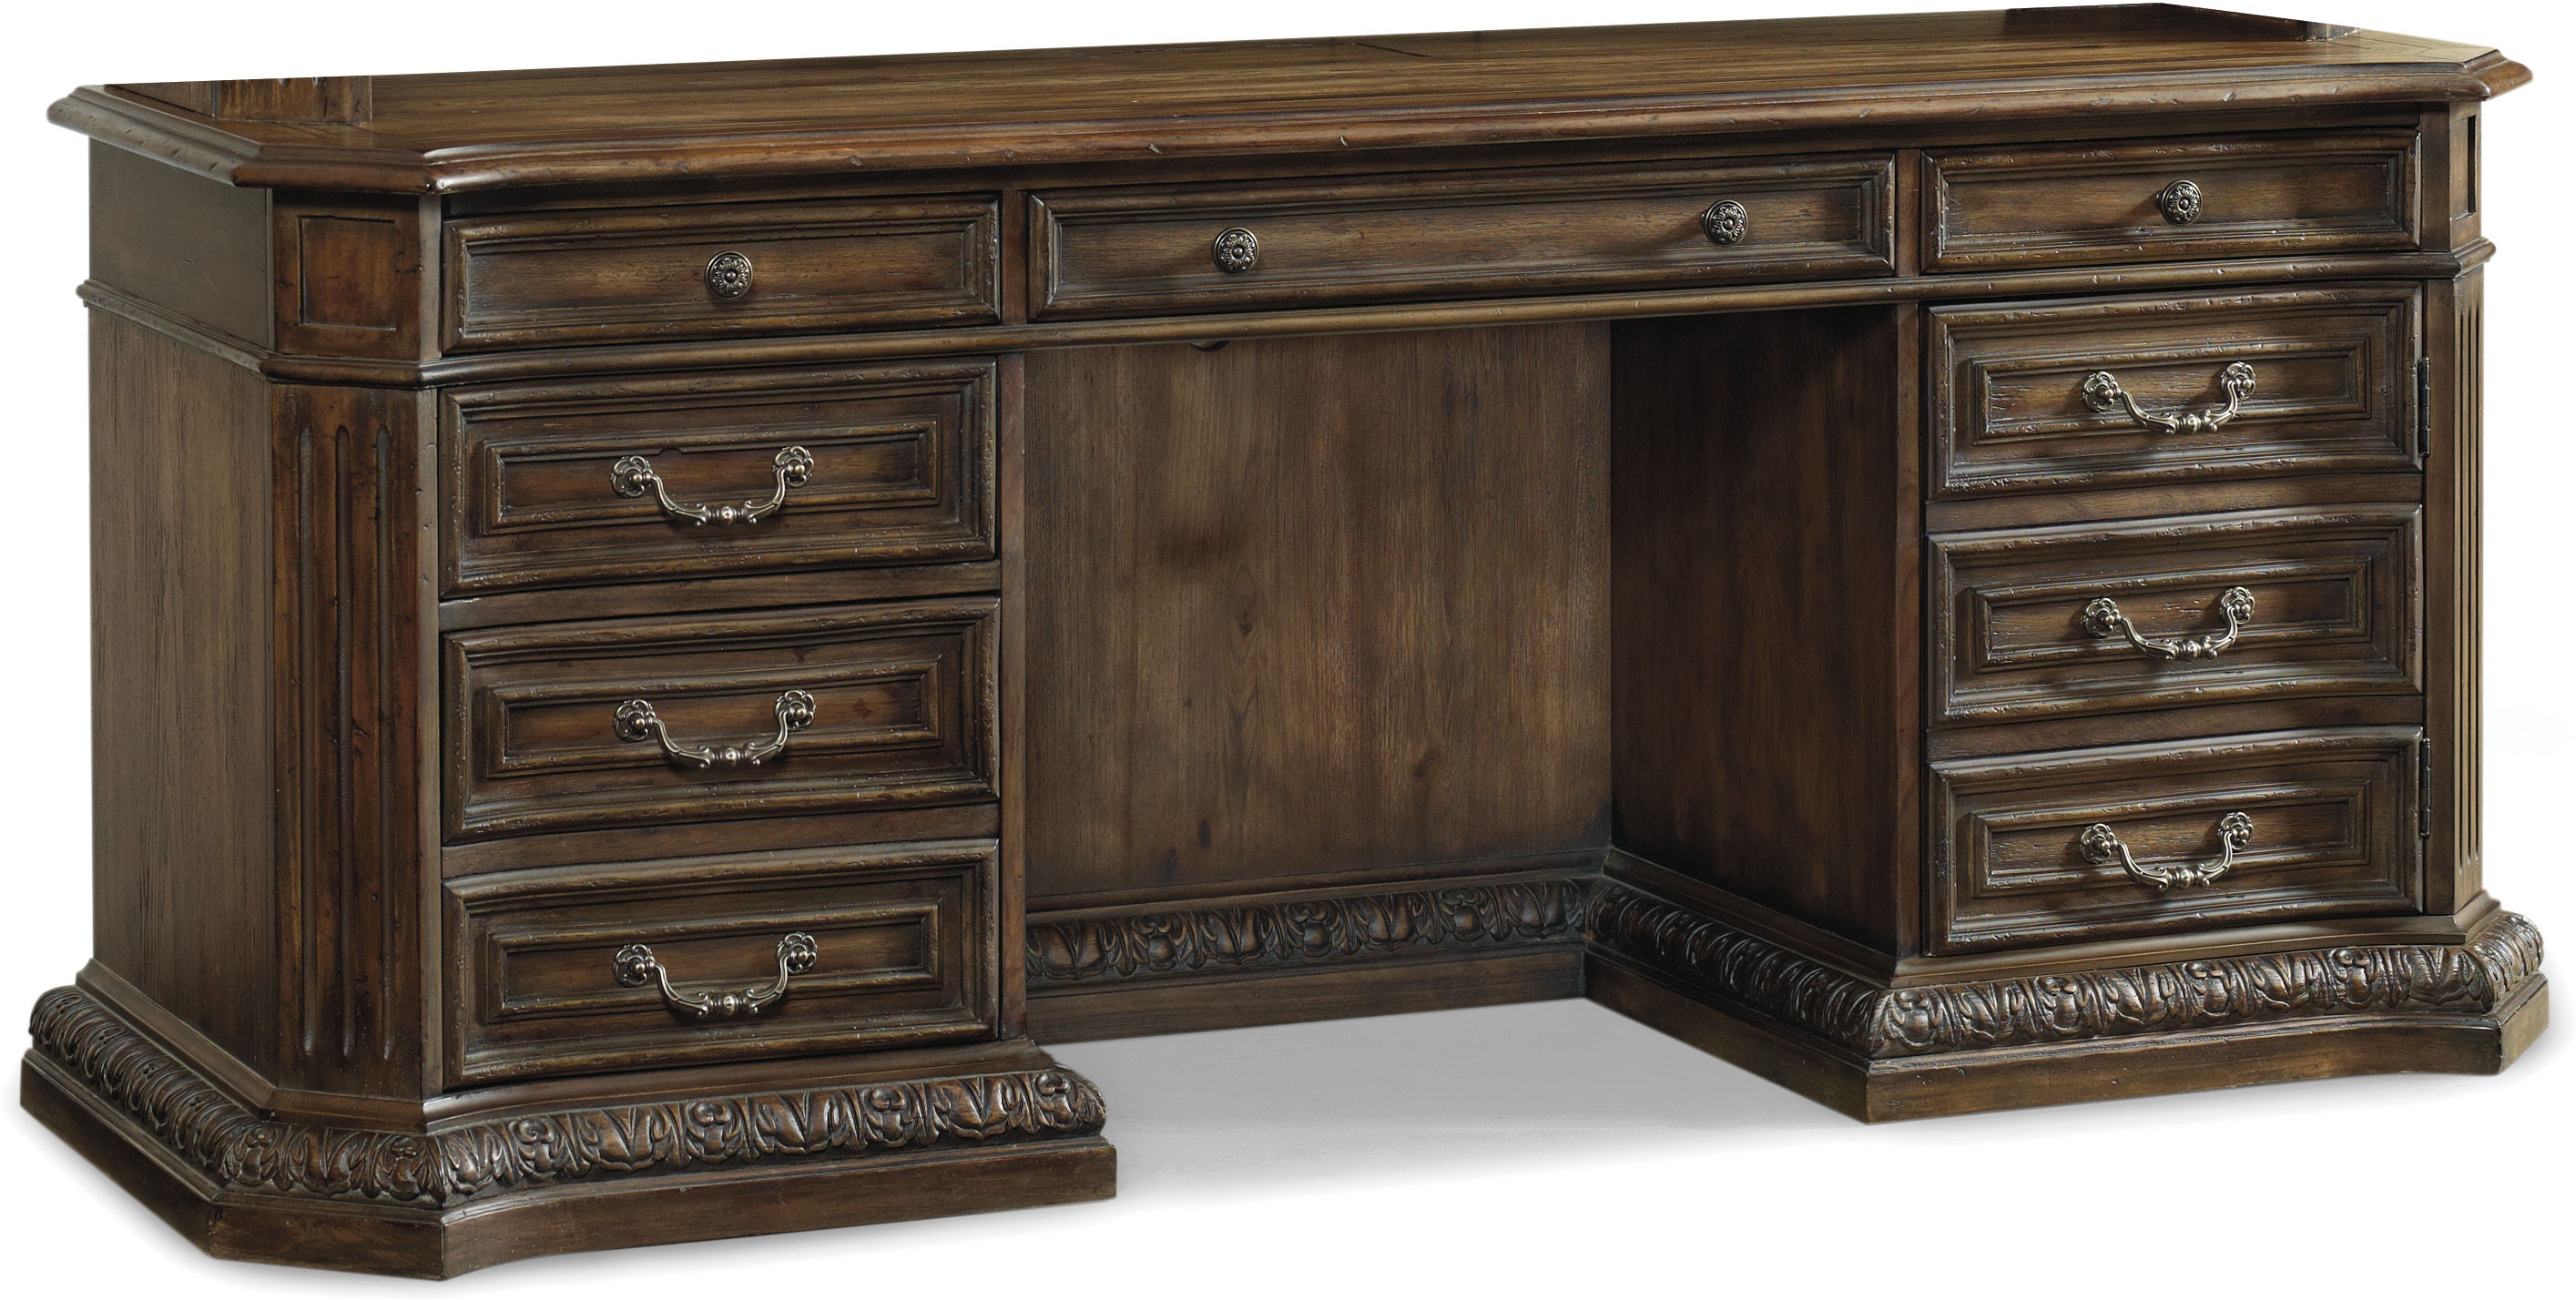 Hooker Furniture Home Office Rhapsody Computer Credenza 5070 10464